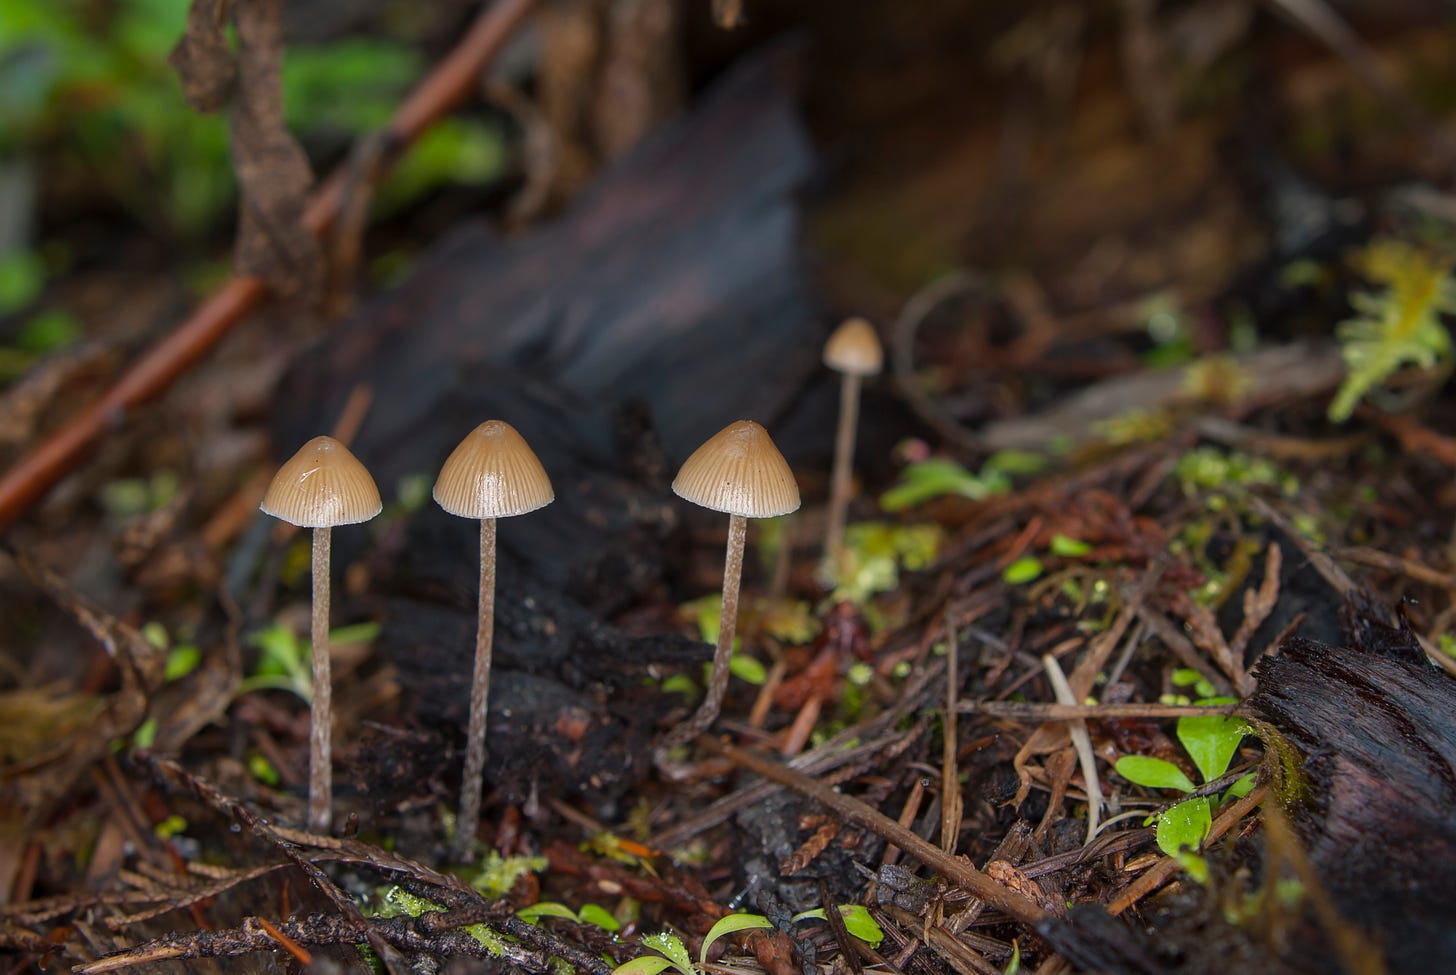 four small brown mushrooms with thin stems rice up out of brown mulch with green sprouts at the base of a tree